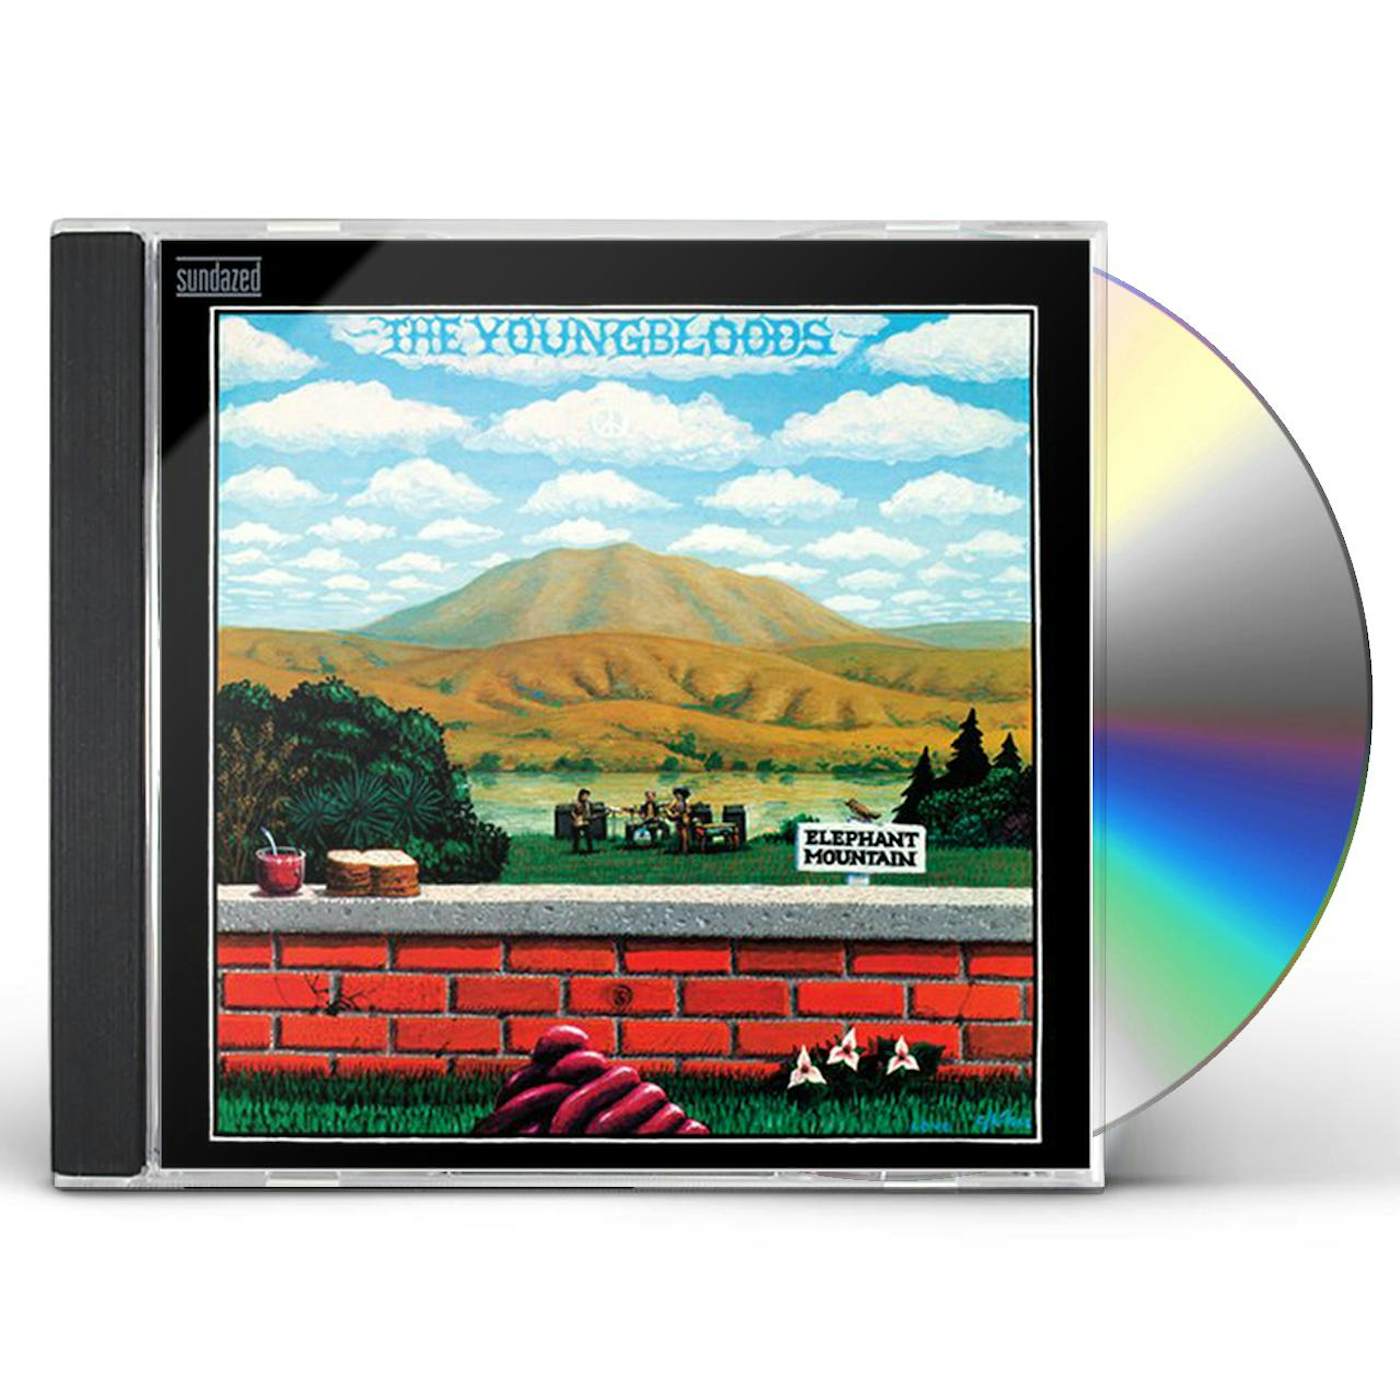 The Youngbloods ELEPHANT MOUNTAIN CD